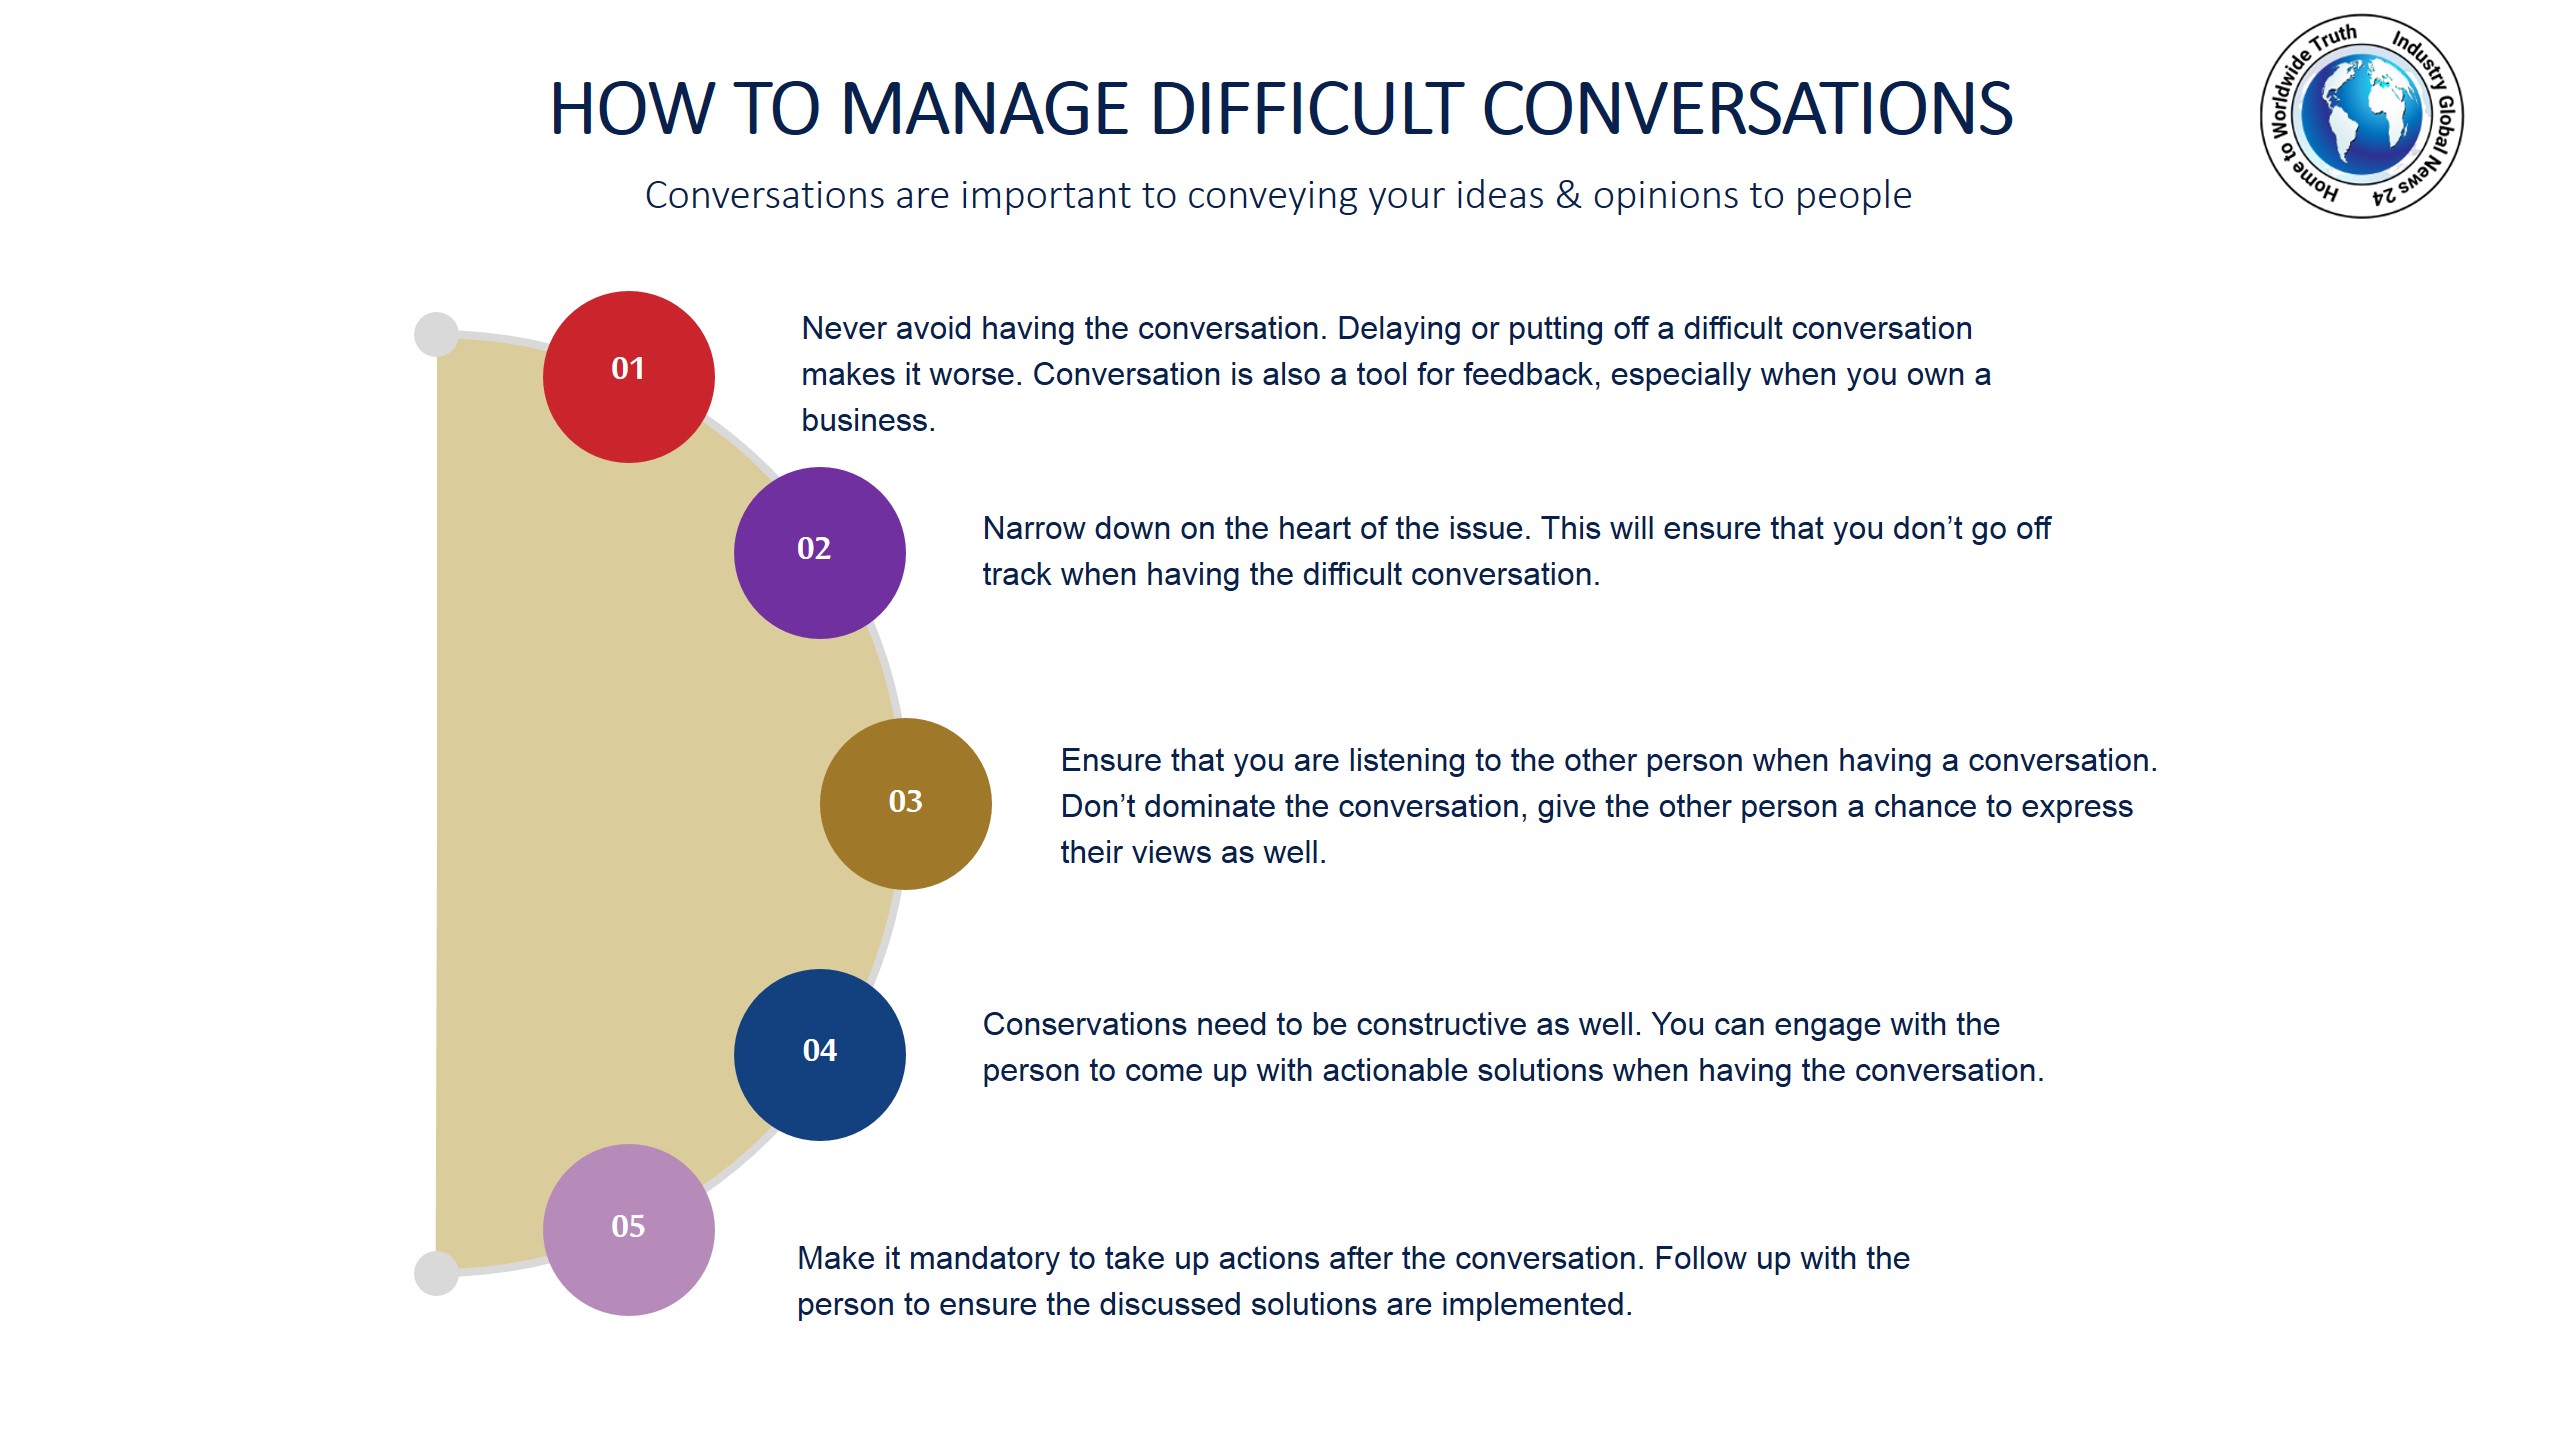 How to manage difficult conversations